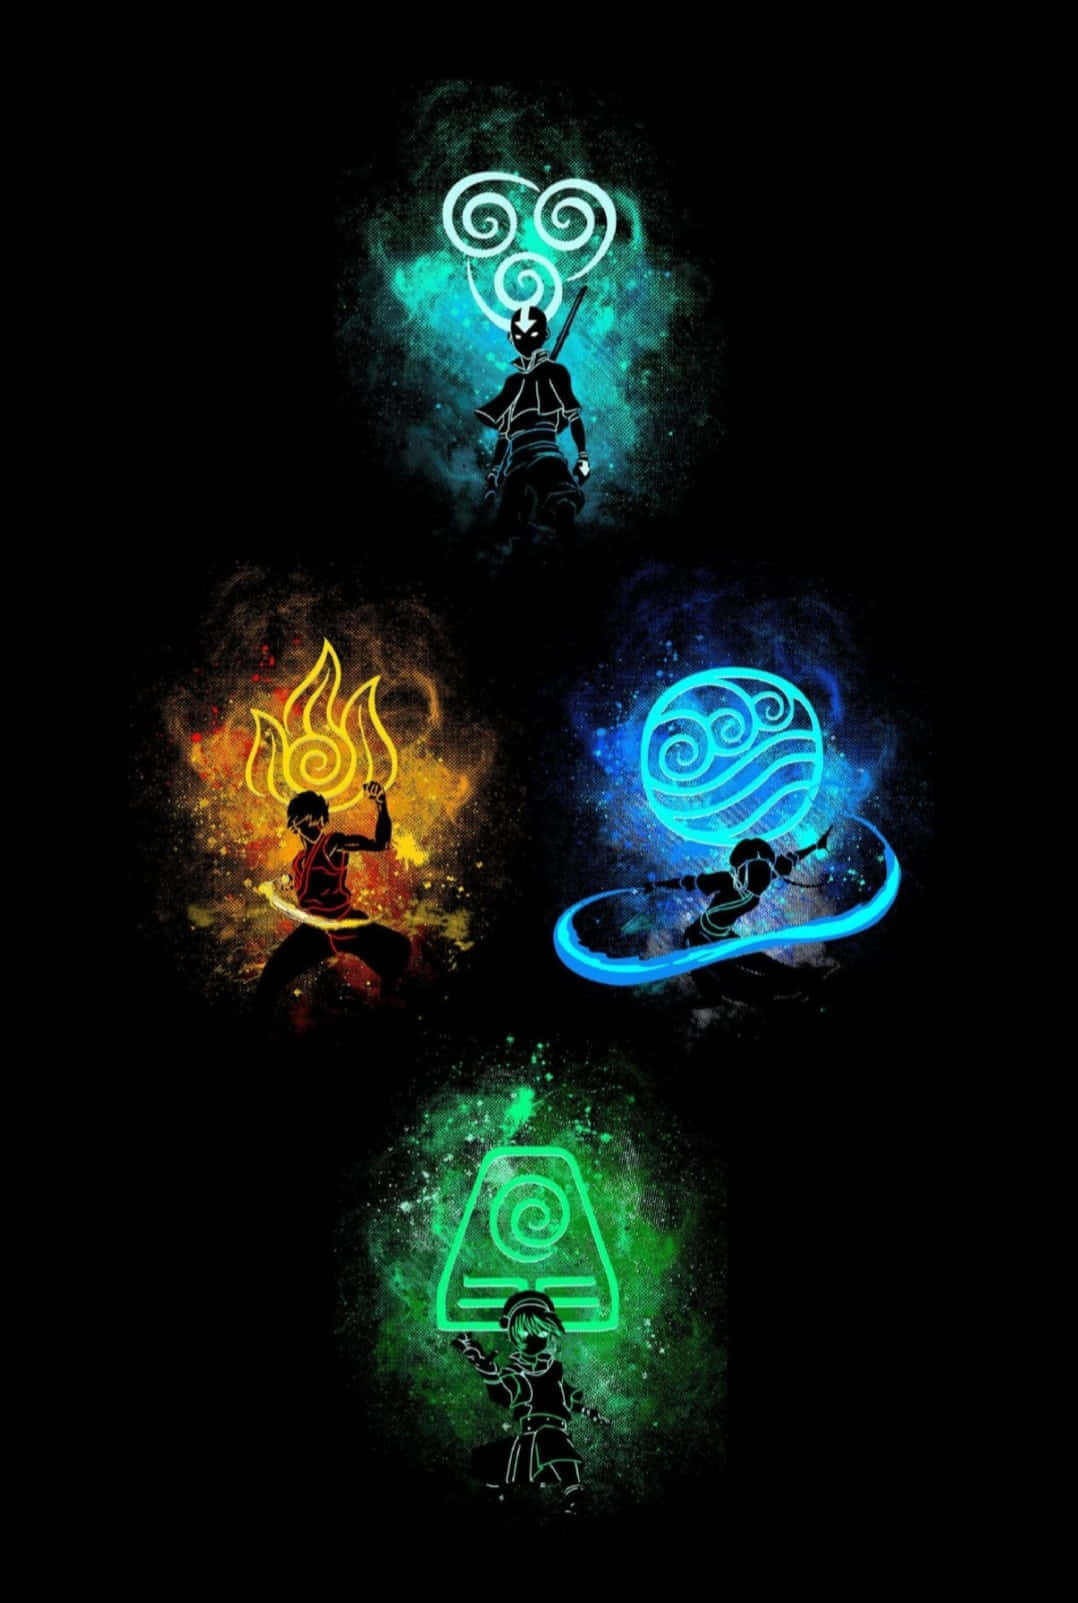 Aang In Avatar State With Elements Swirling - Avatar The Last Airbender